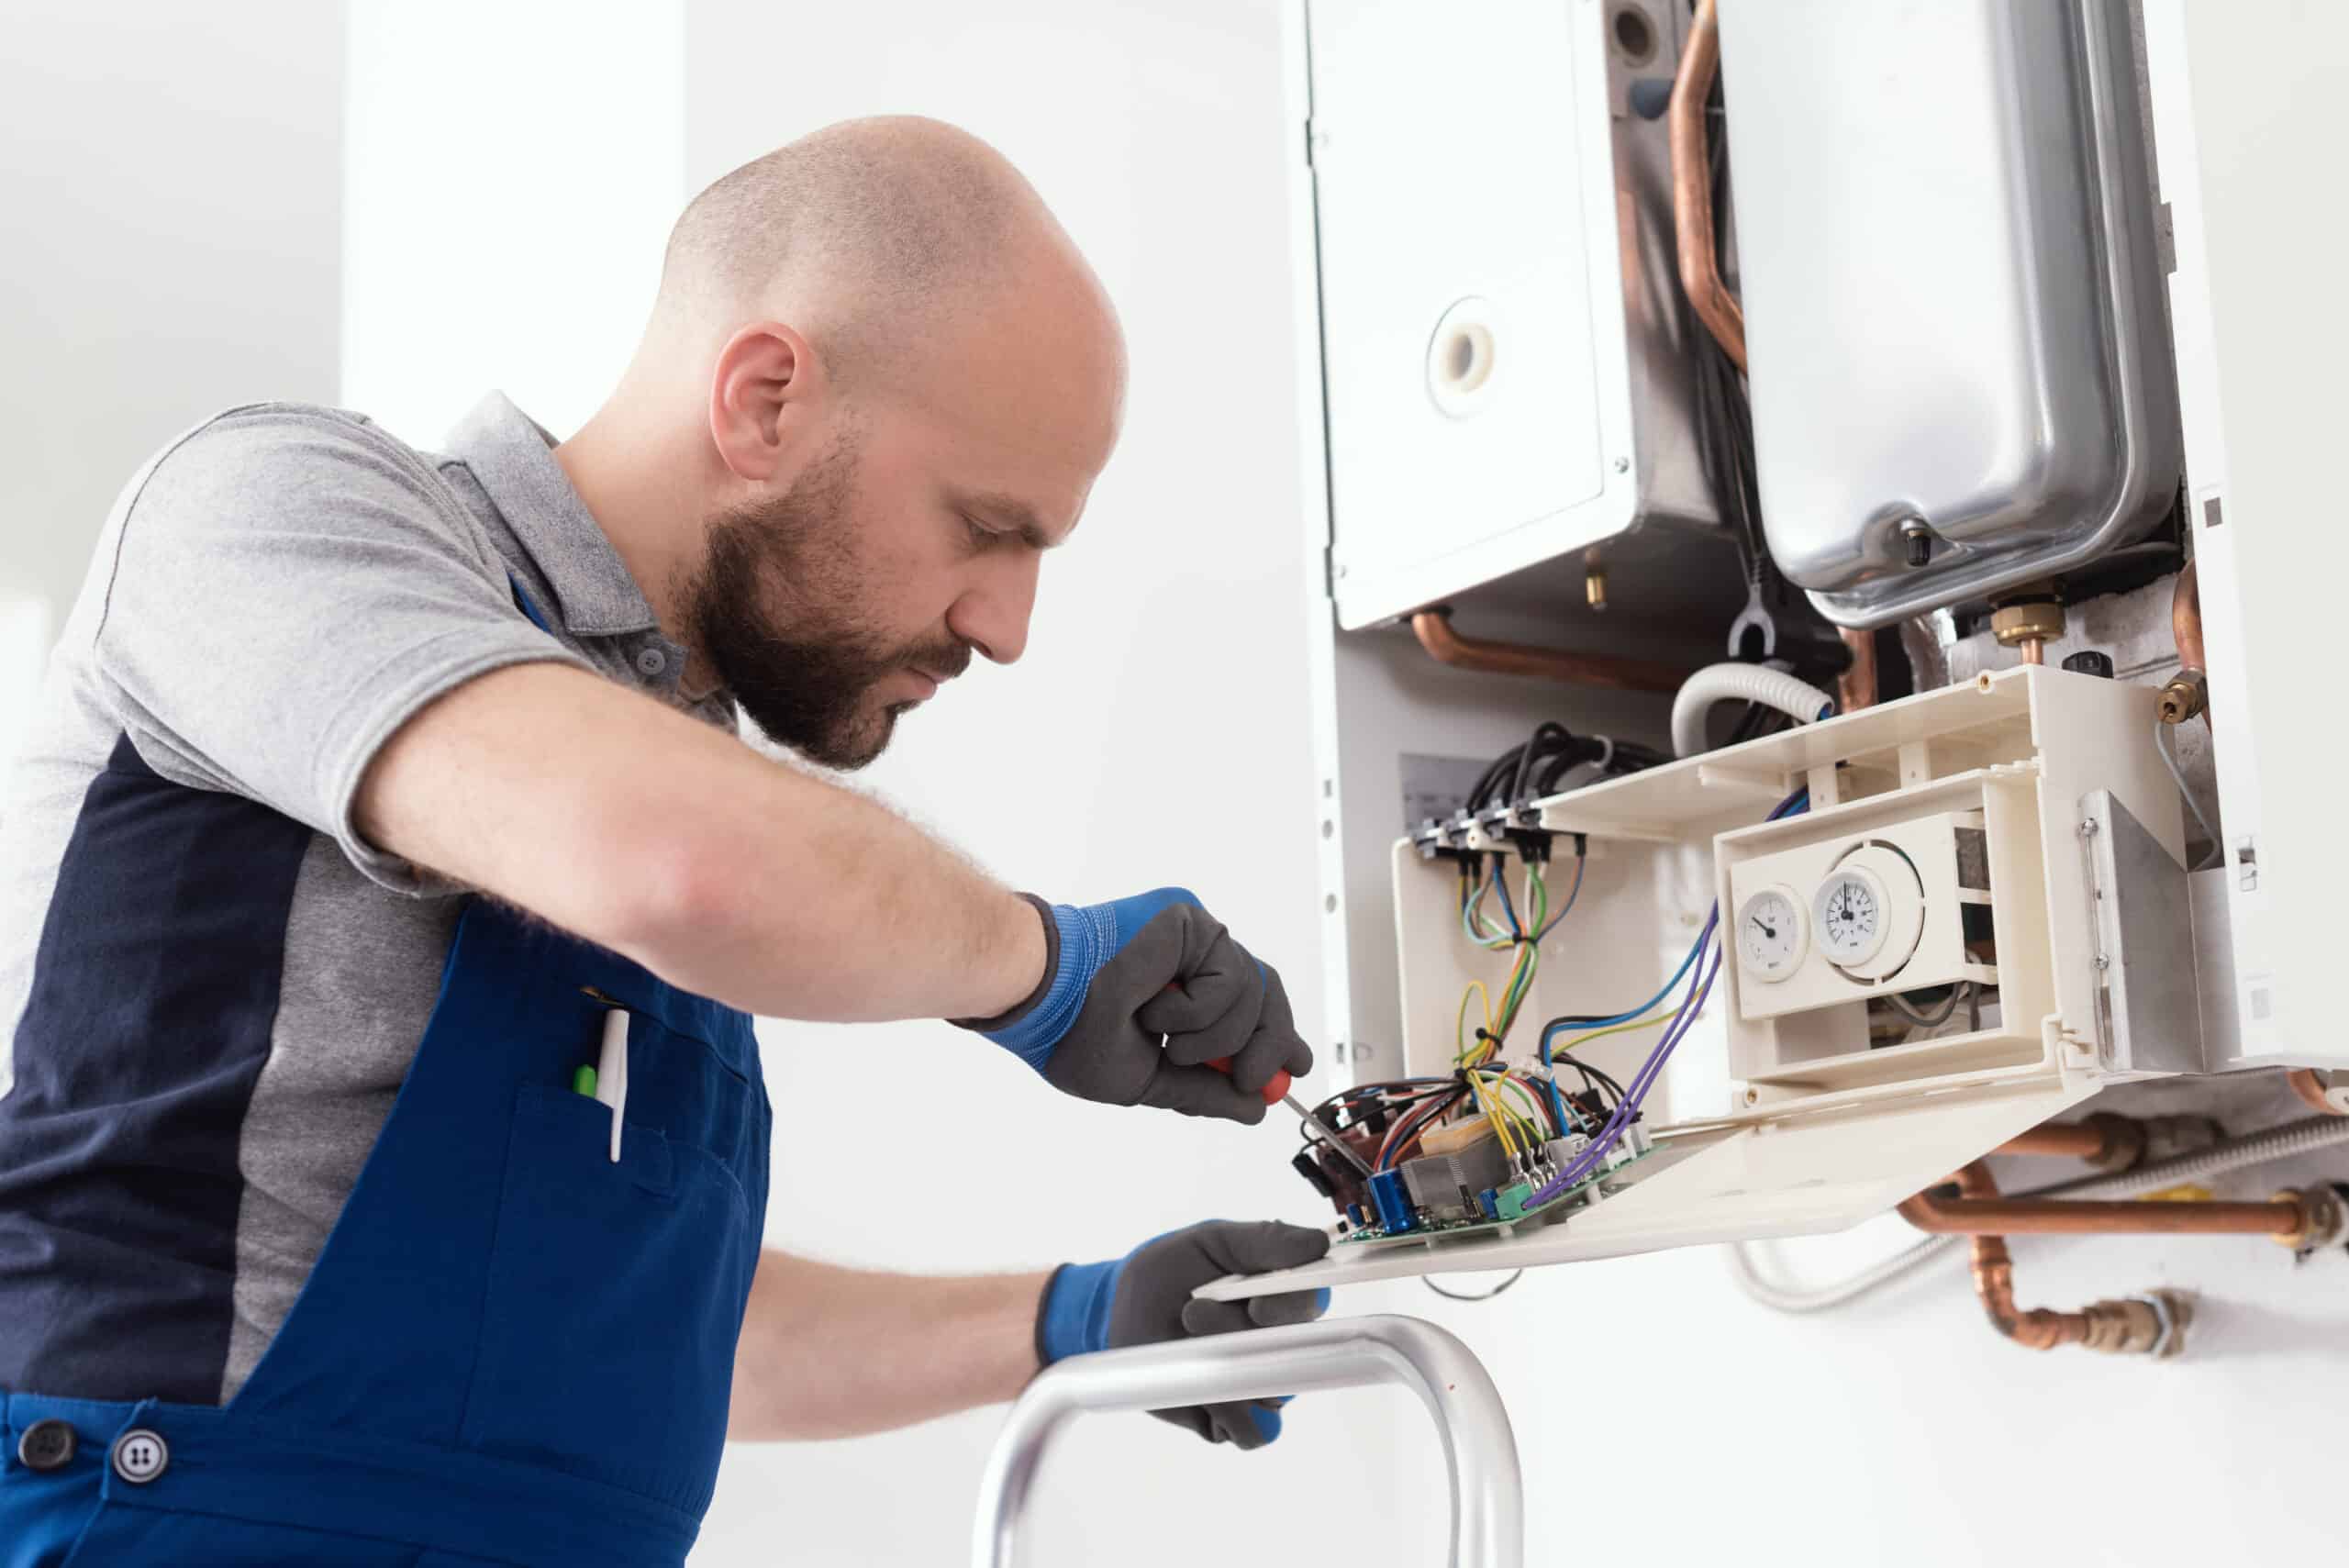 HVAC technician performing a maintenance service on a home heating system